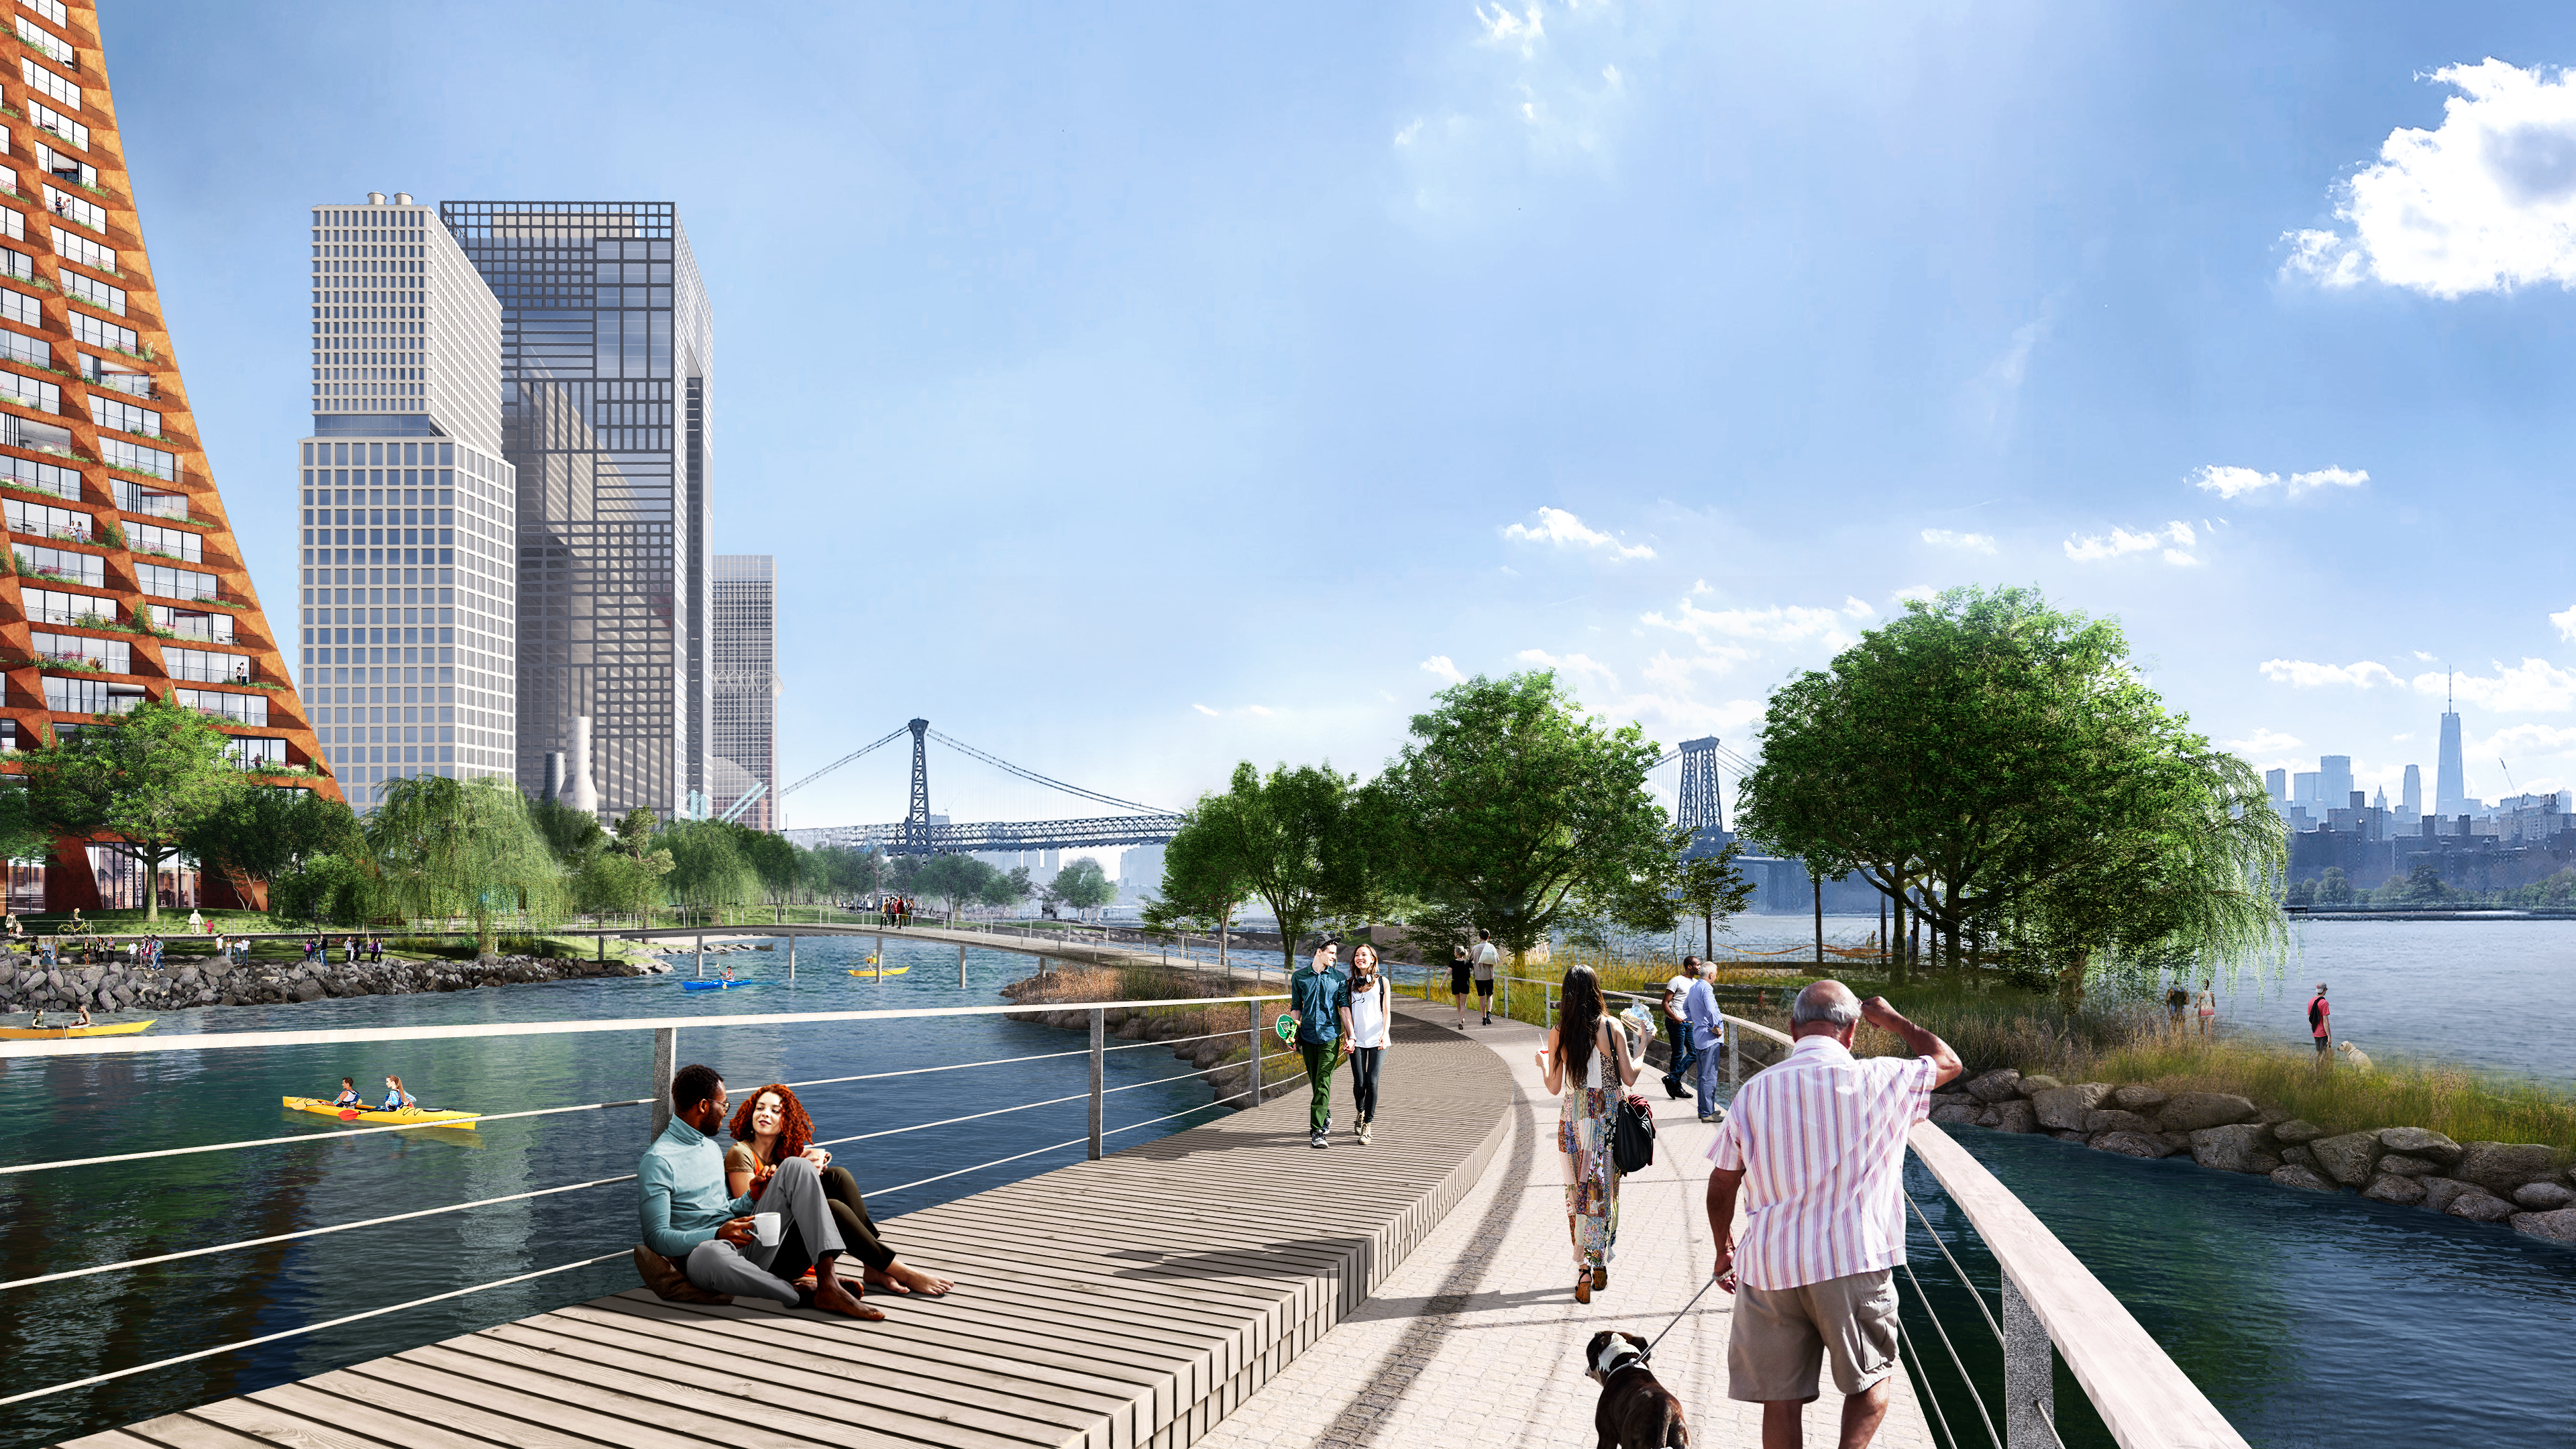 Here’s a glimpse of the planned River Street park. Rendering by James Corner Field Operations and BIG-Bjarke Ingels Group courtesy of Two Trees Management